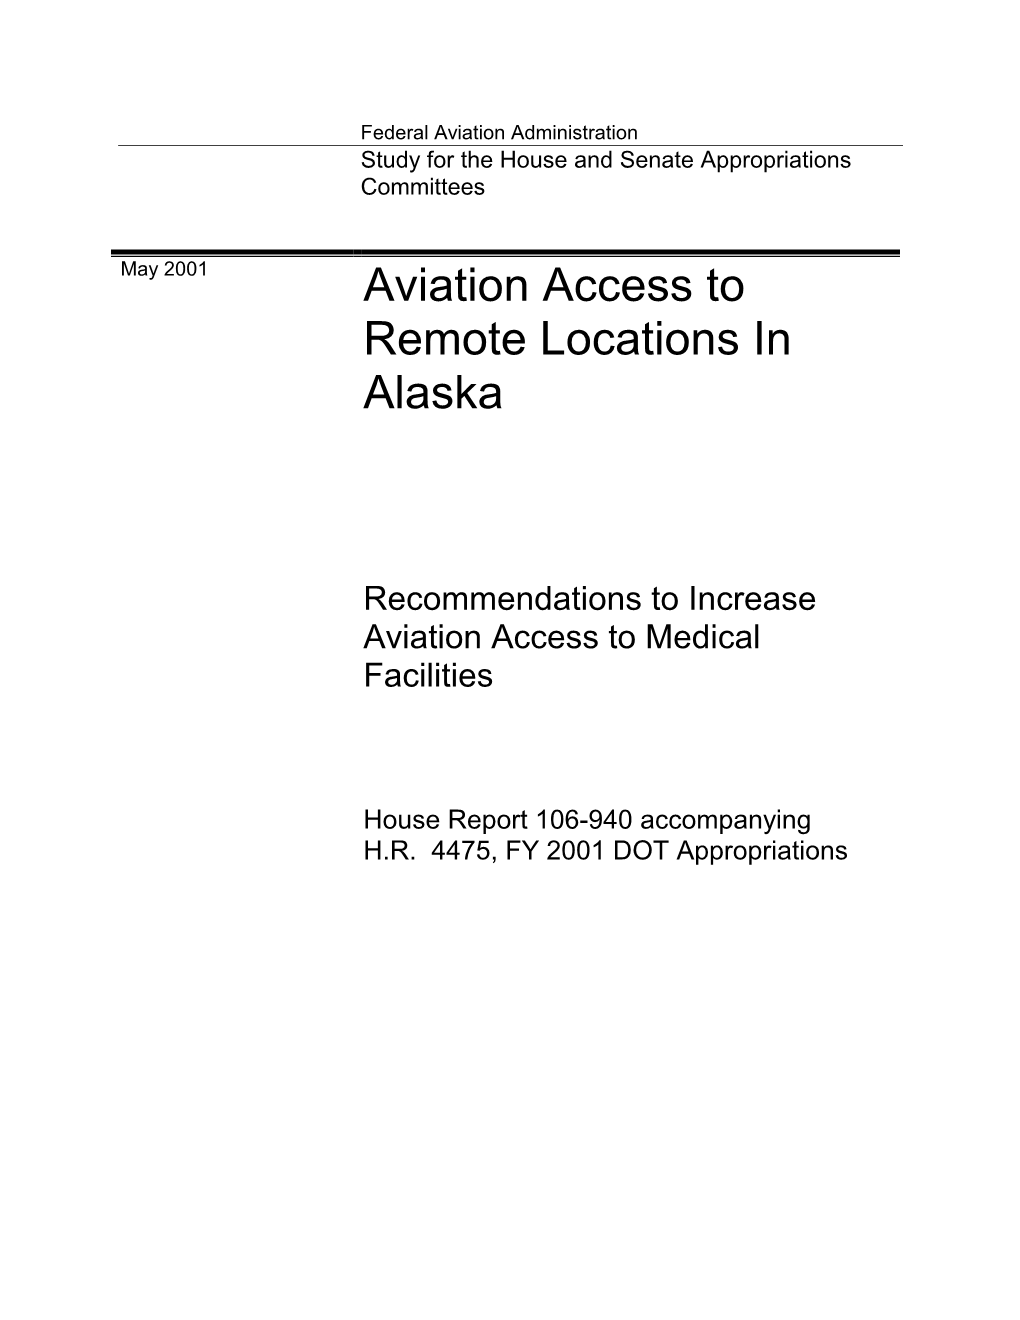 Aviation Access to Remote Locations in Alaska